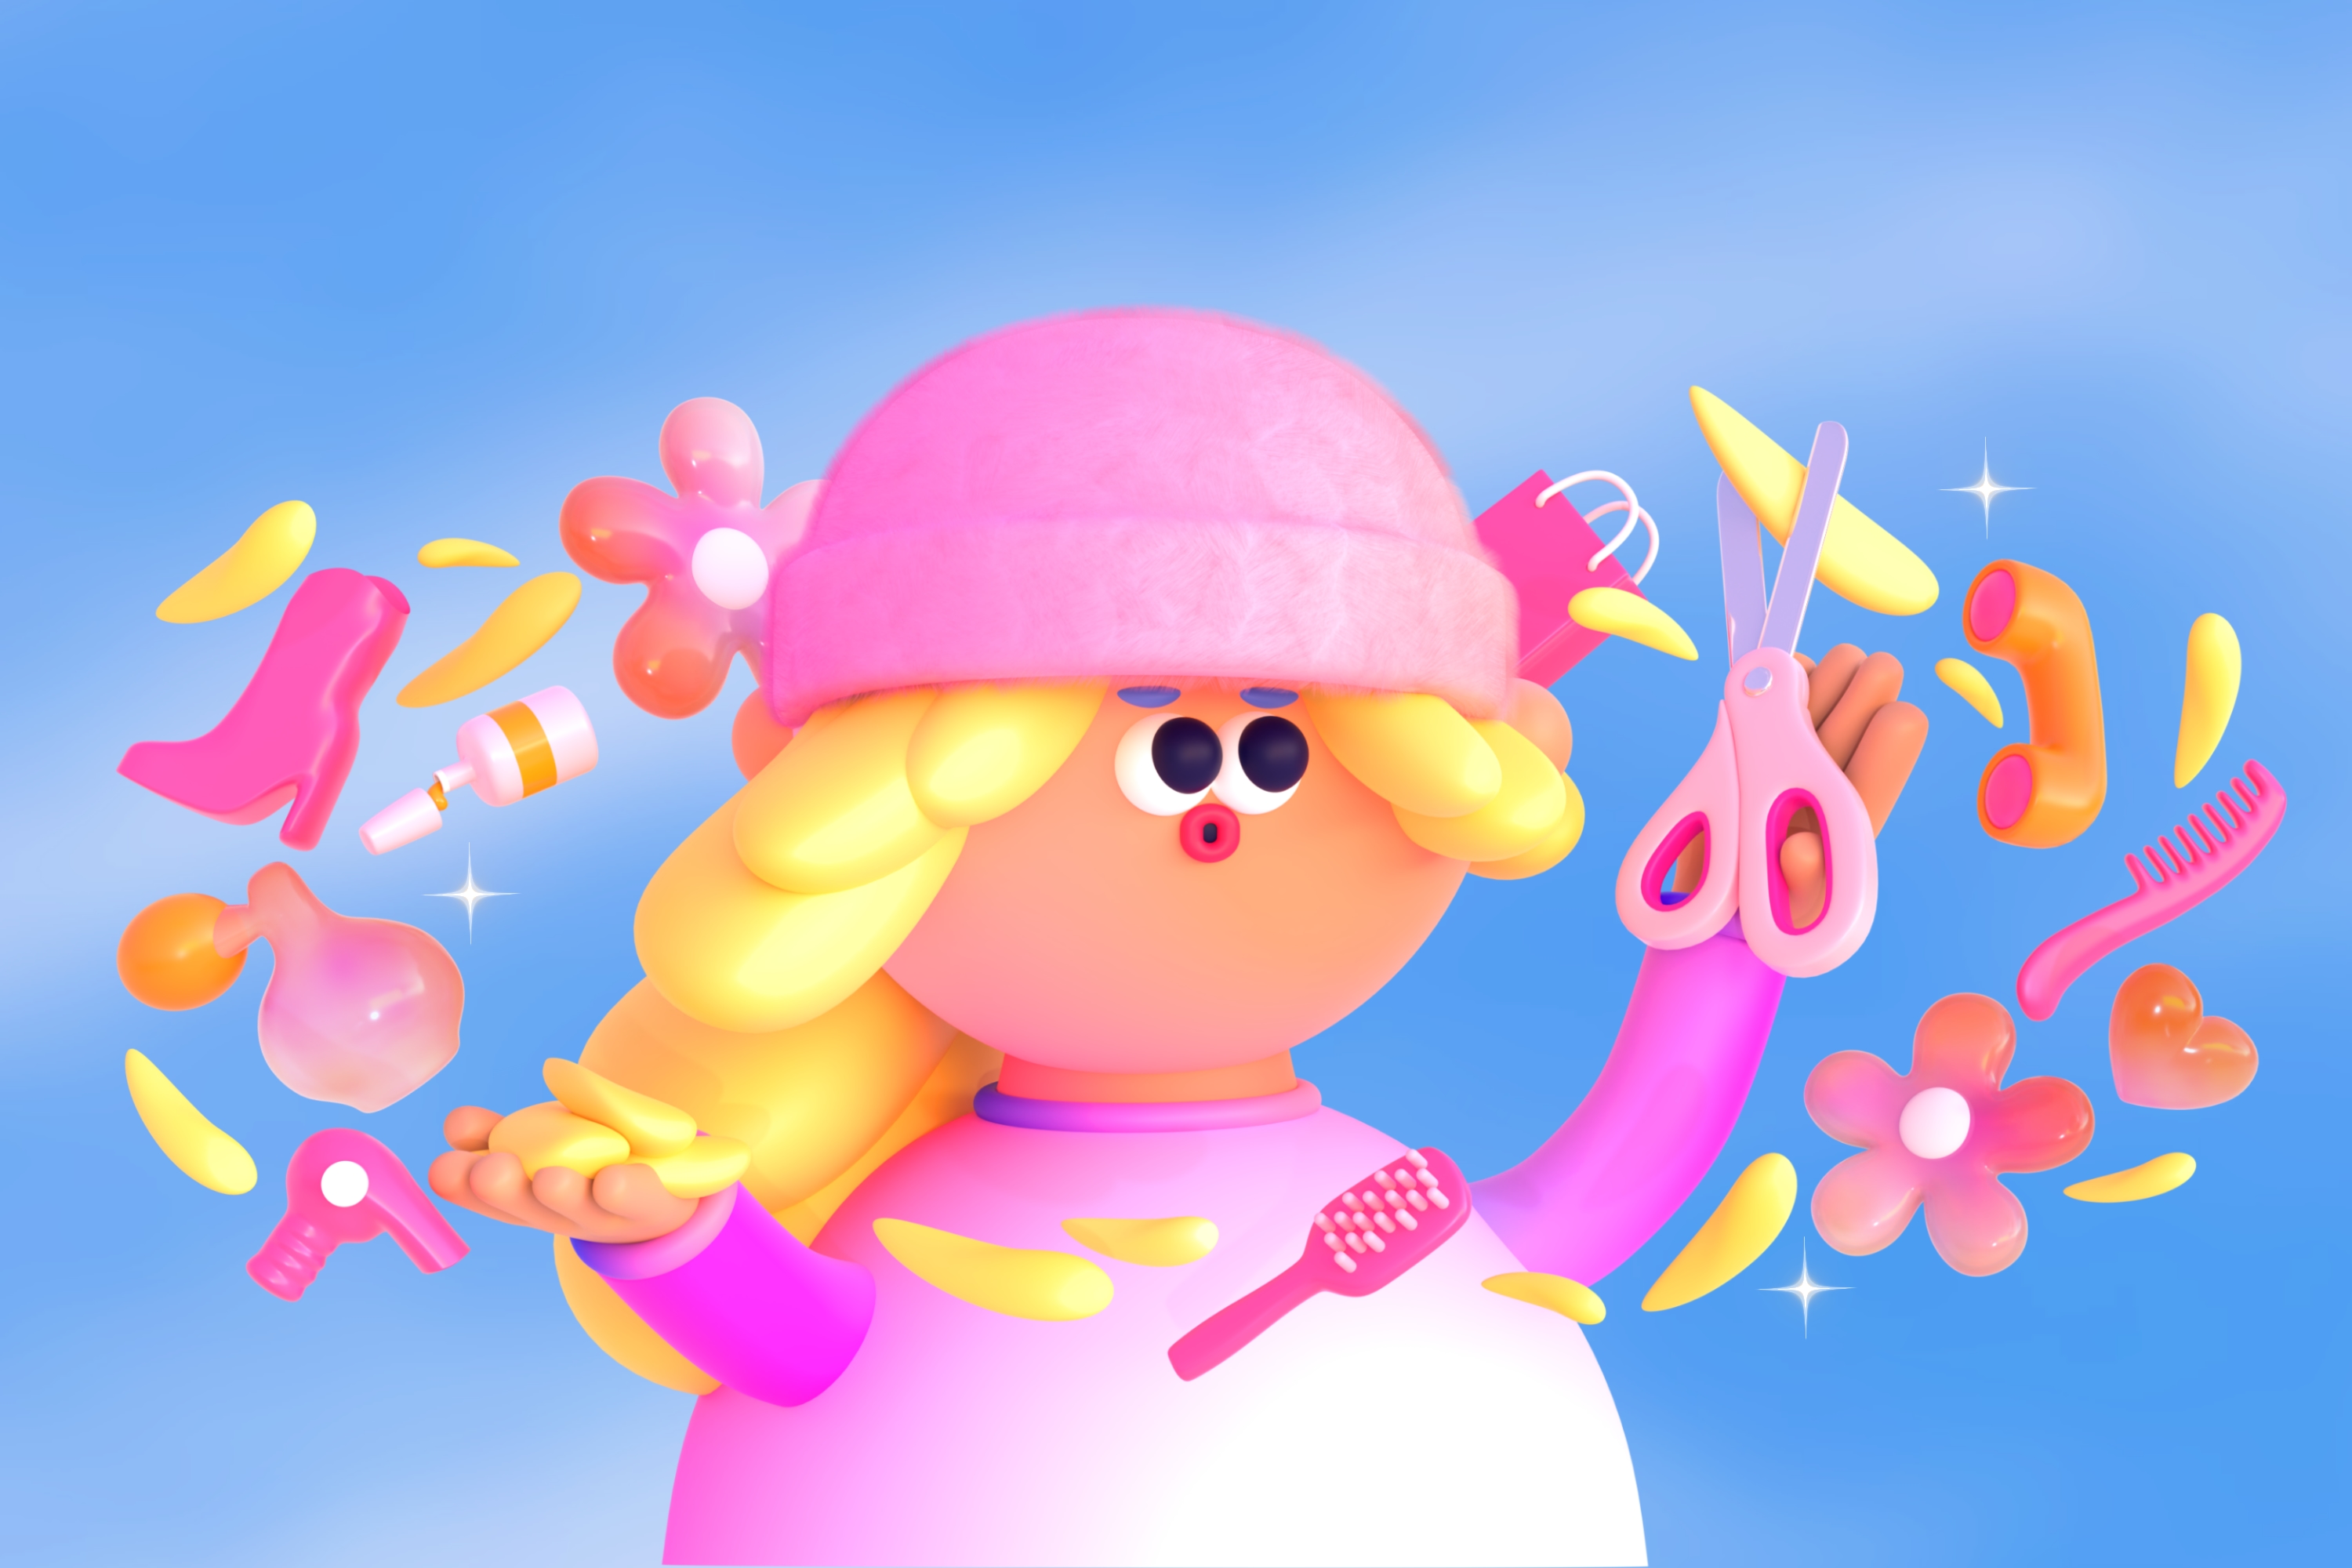 A 3D illustration of a person with blonde hair cuts a little piece. The person is surrounded by Barbie accessories.